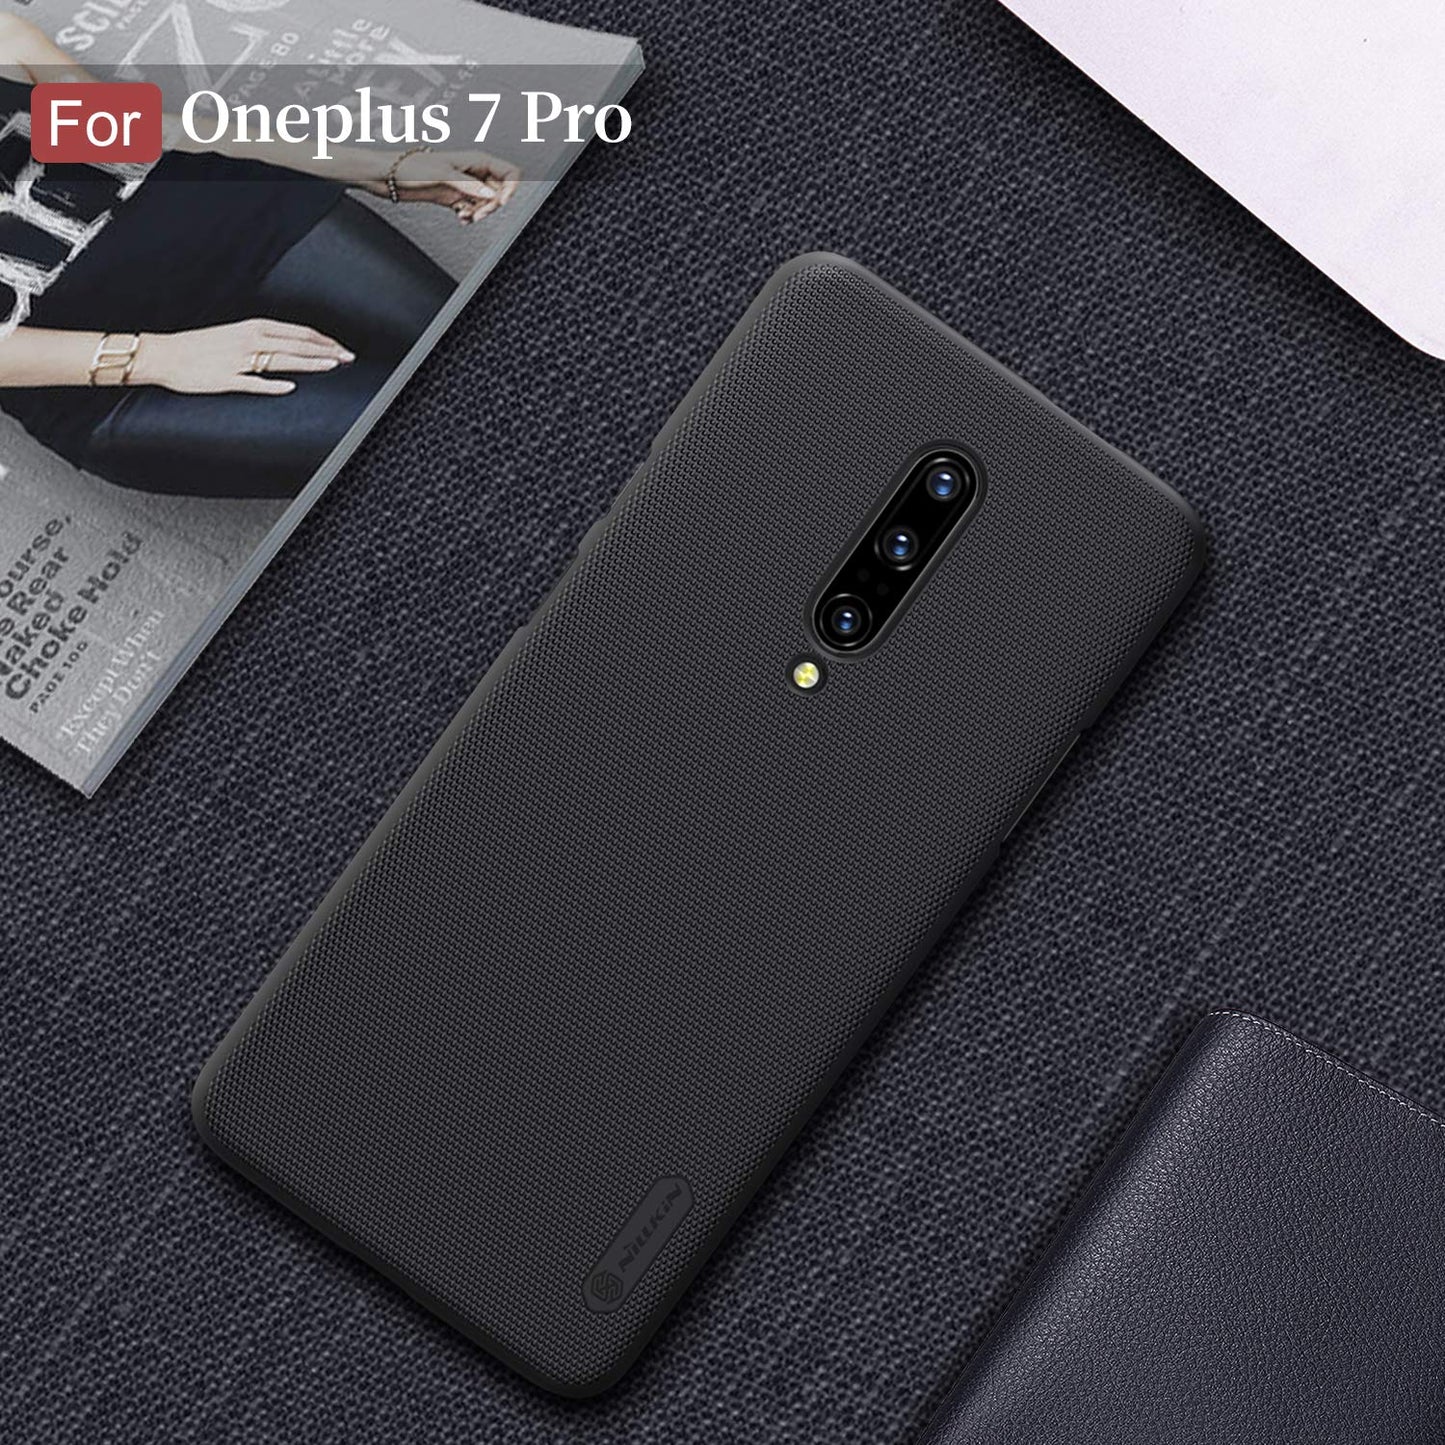 Nillkin OnePlus 7 Pro, Soft Slim Frosted All-Round Protection Anti-Falling Anti-Fingerprint Simple Style Silicone Back Cover Protector for OnePlus 7 Pro Case [Black]